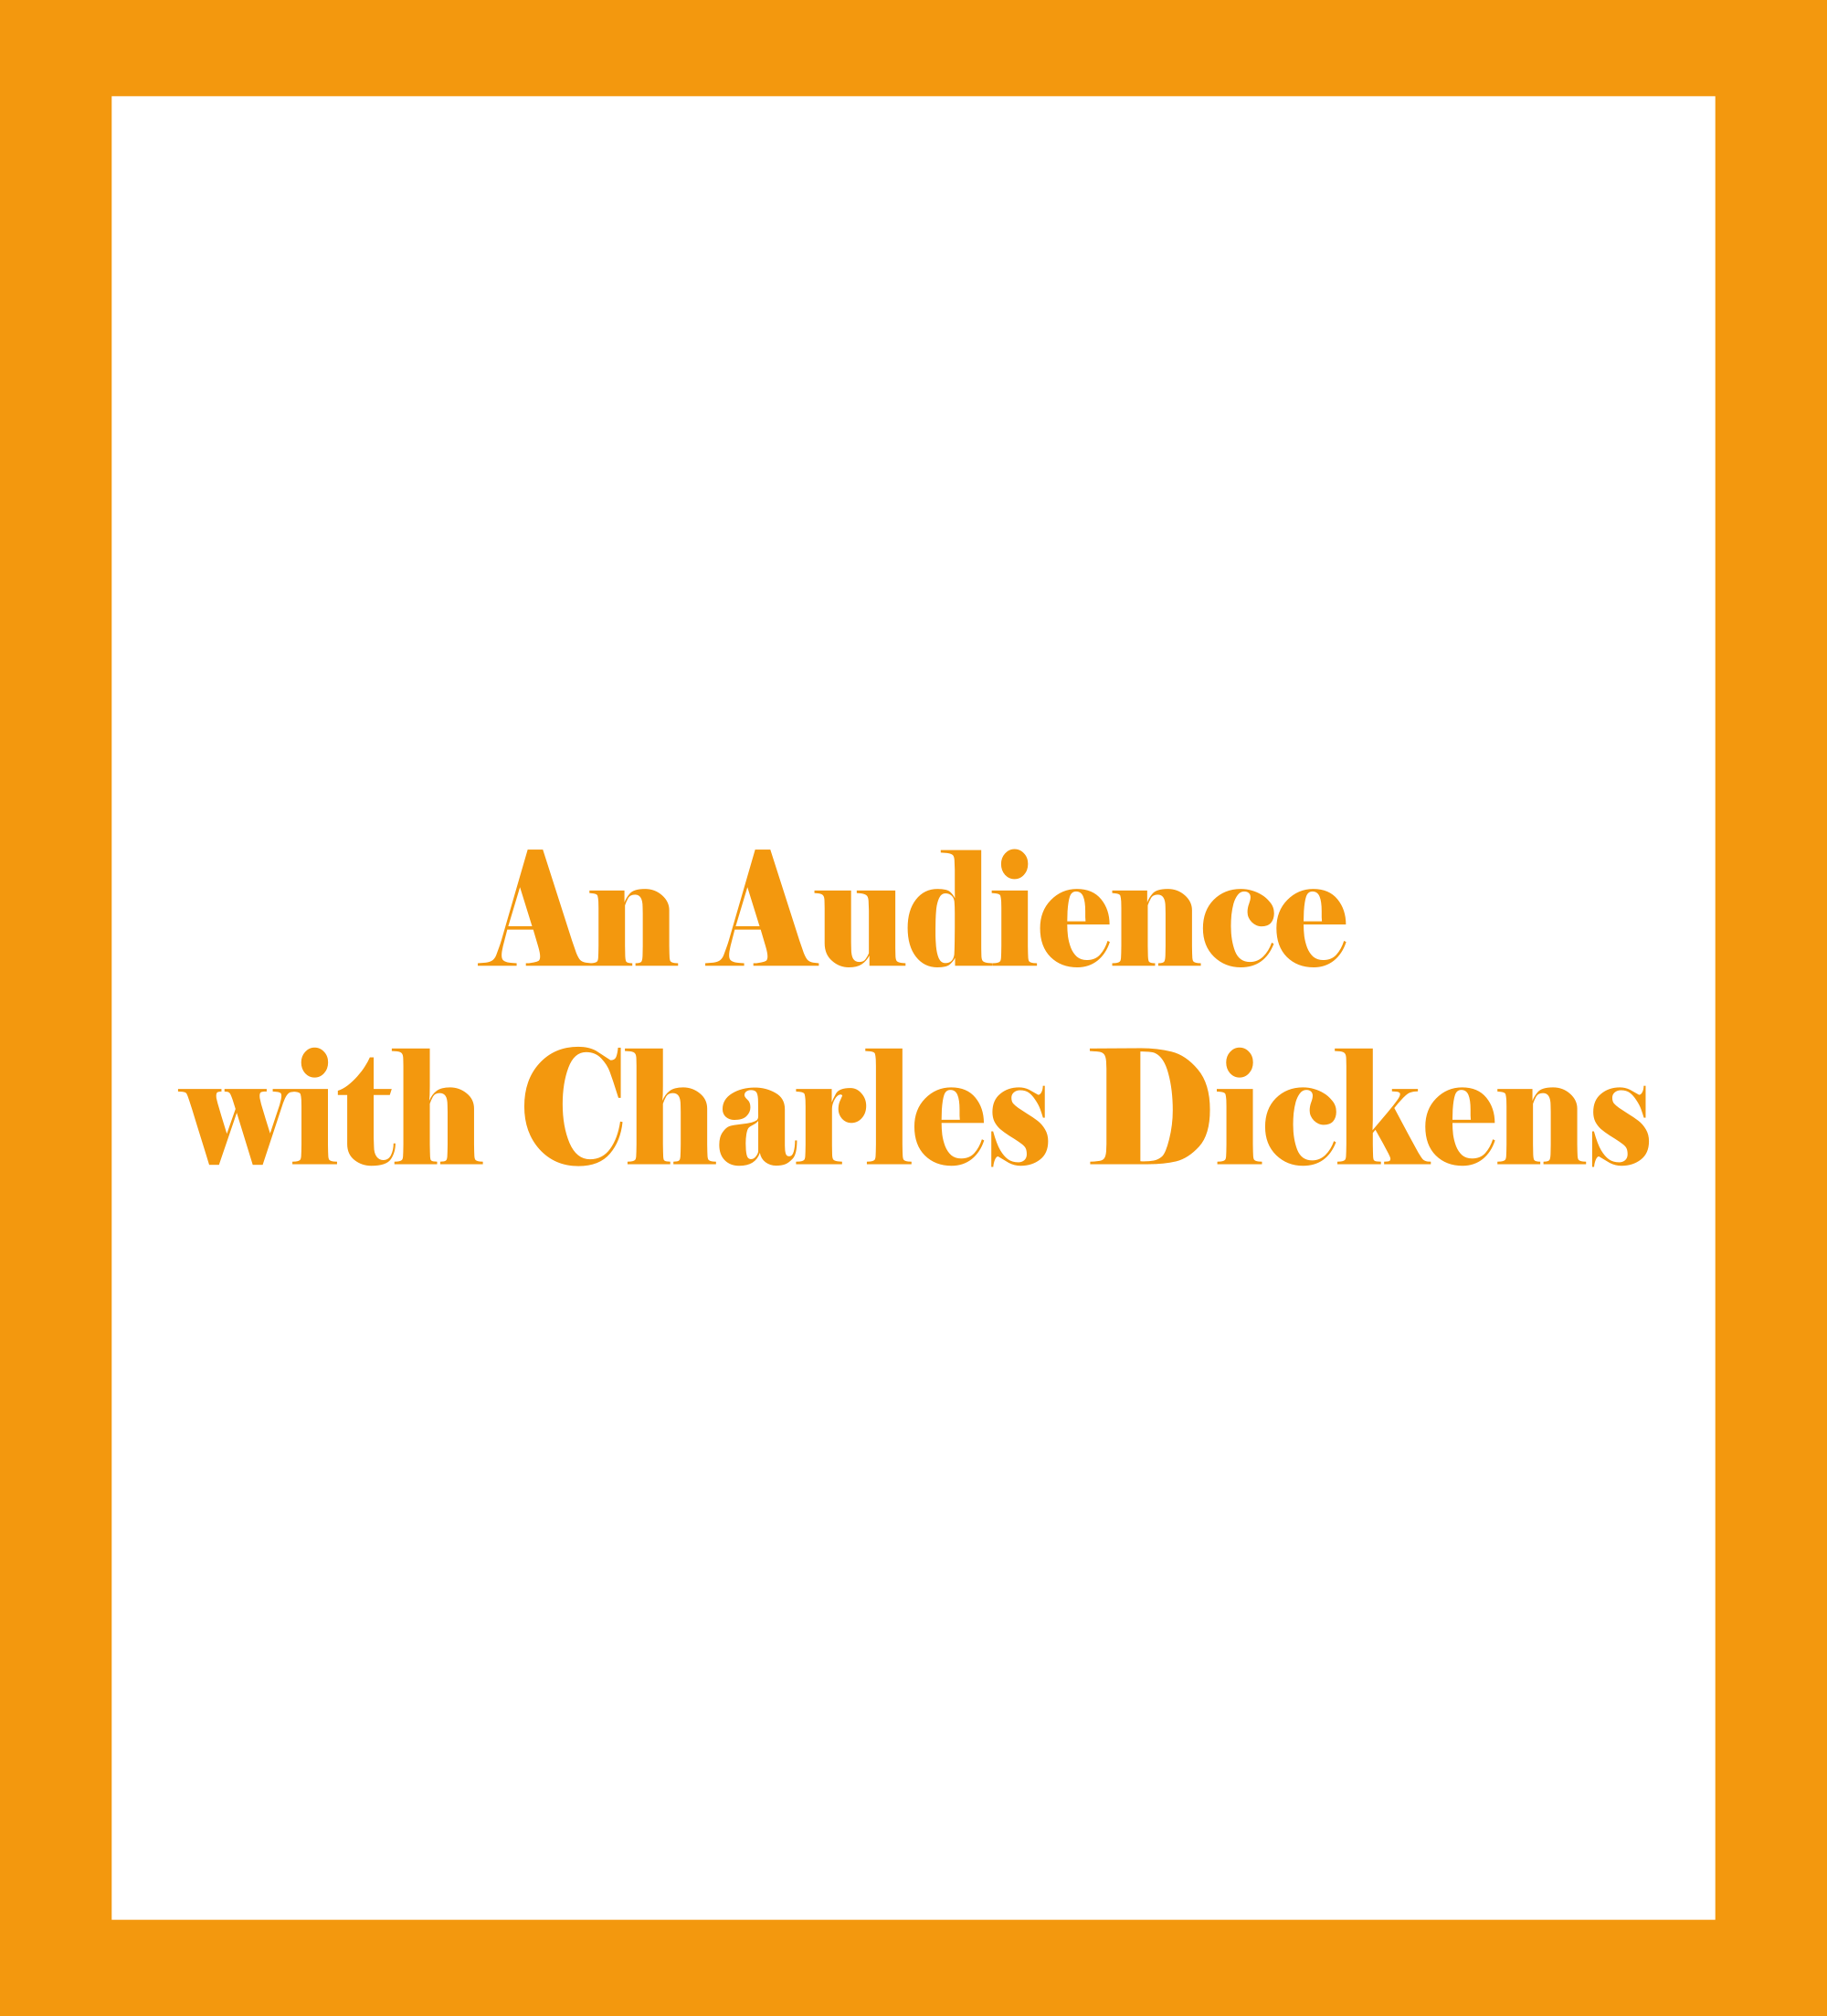 Caratula de An Audience with Charles Dickens (Una audiencia con Charles Dickens) 